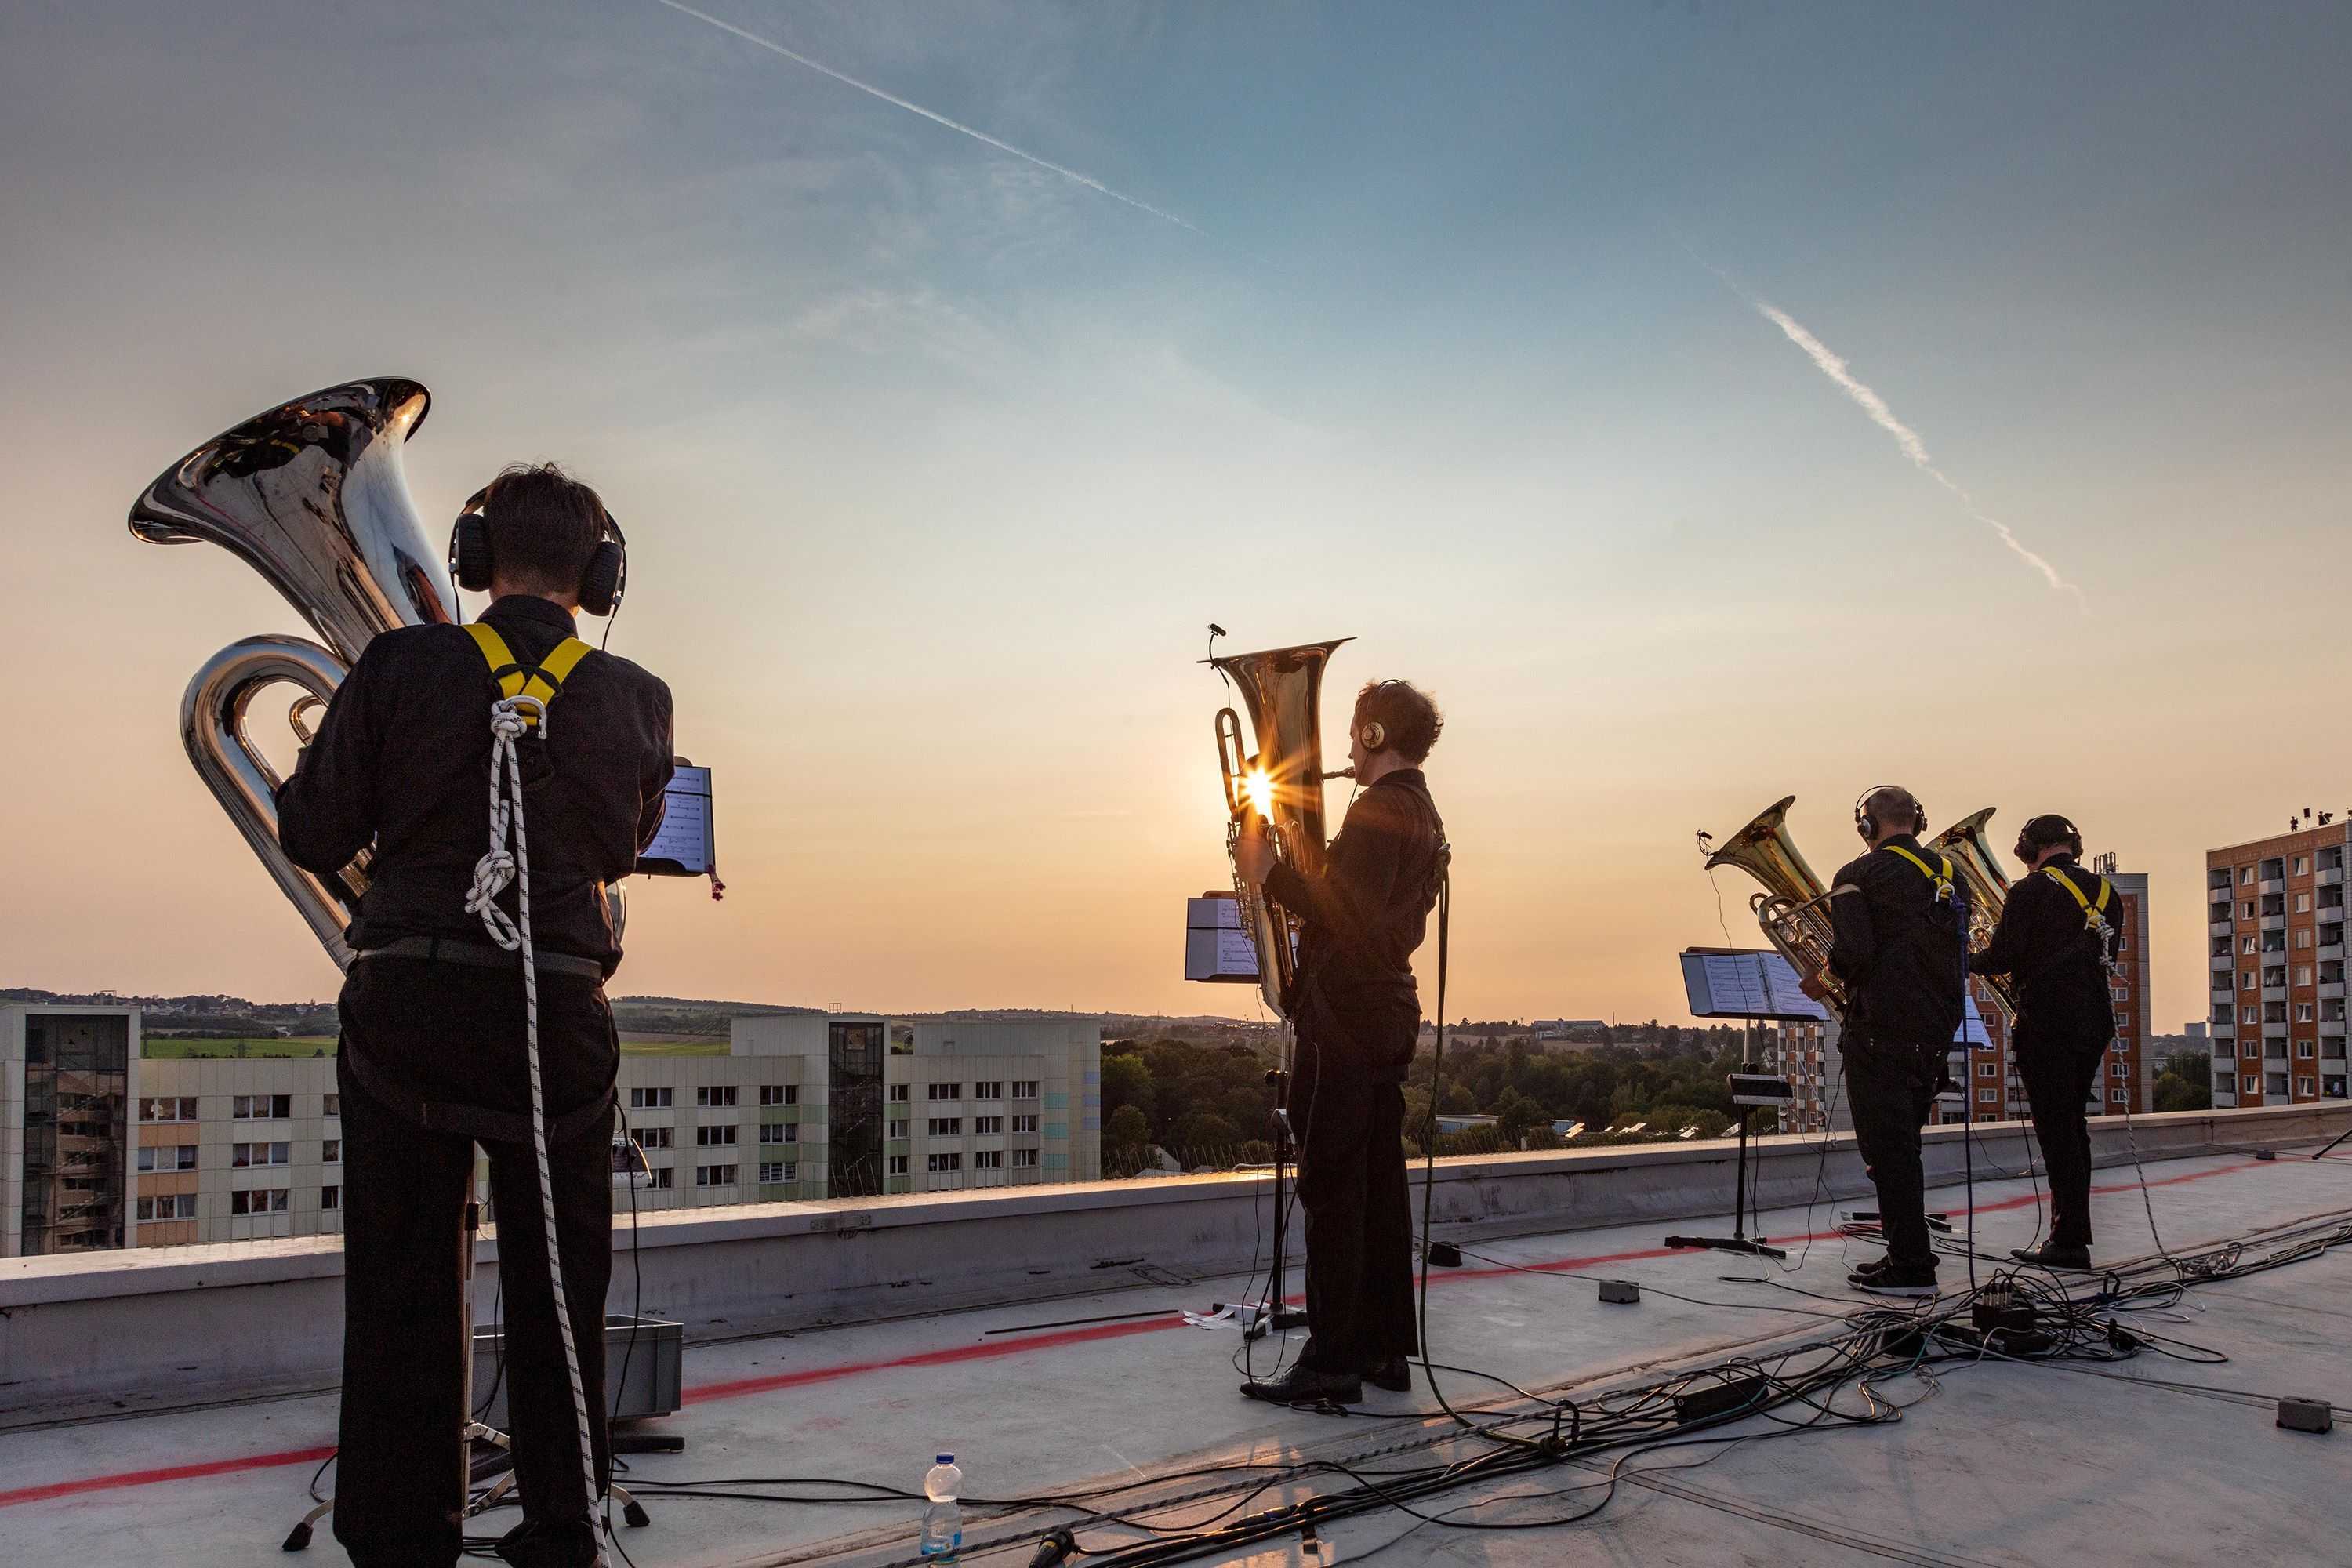 Four blowers, members of the Dresdner Sinfoniker are standing on the roof o a tower-builidng and are playing their instruments. They are secures with climbing gear and the sun goes down in the background